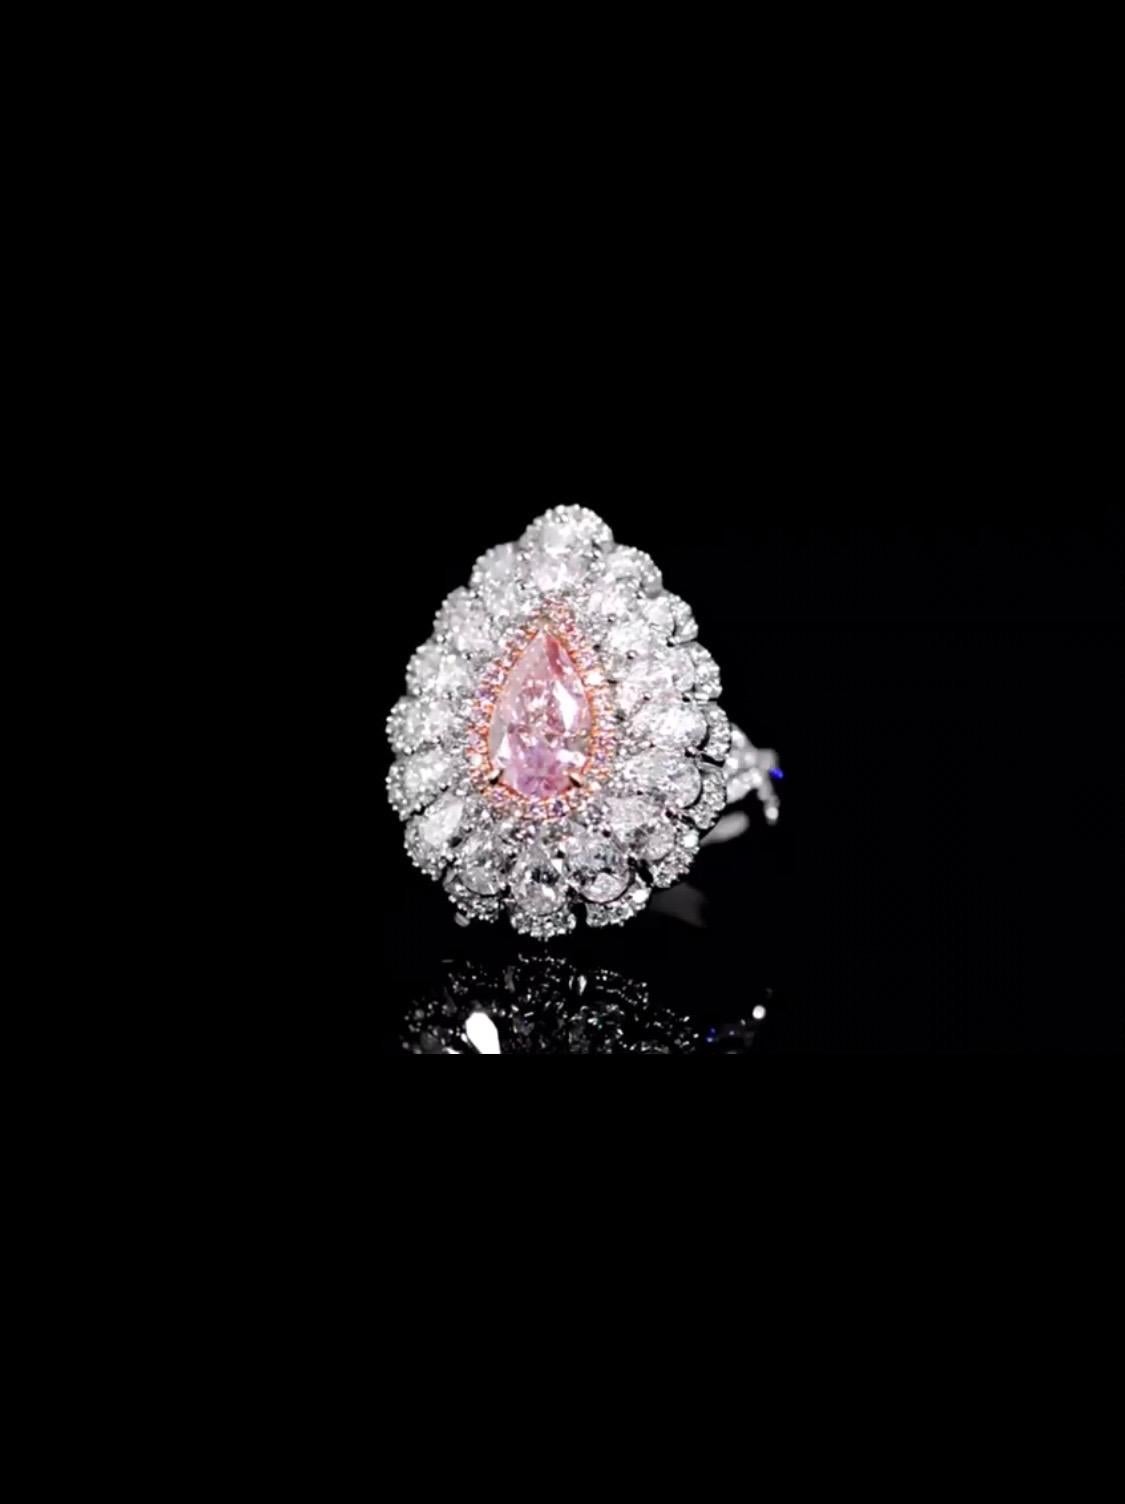 From the Emilio Jewelry Vault, Showcasing a magnificent 1.20 carat Gia certified natural fancy pinkish purple diamond set in the center. The Argyle mines are closed, with no more production this is surely a great investment which will steadily